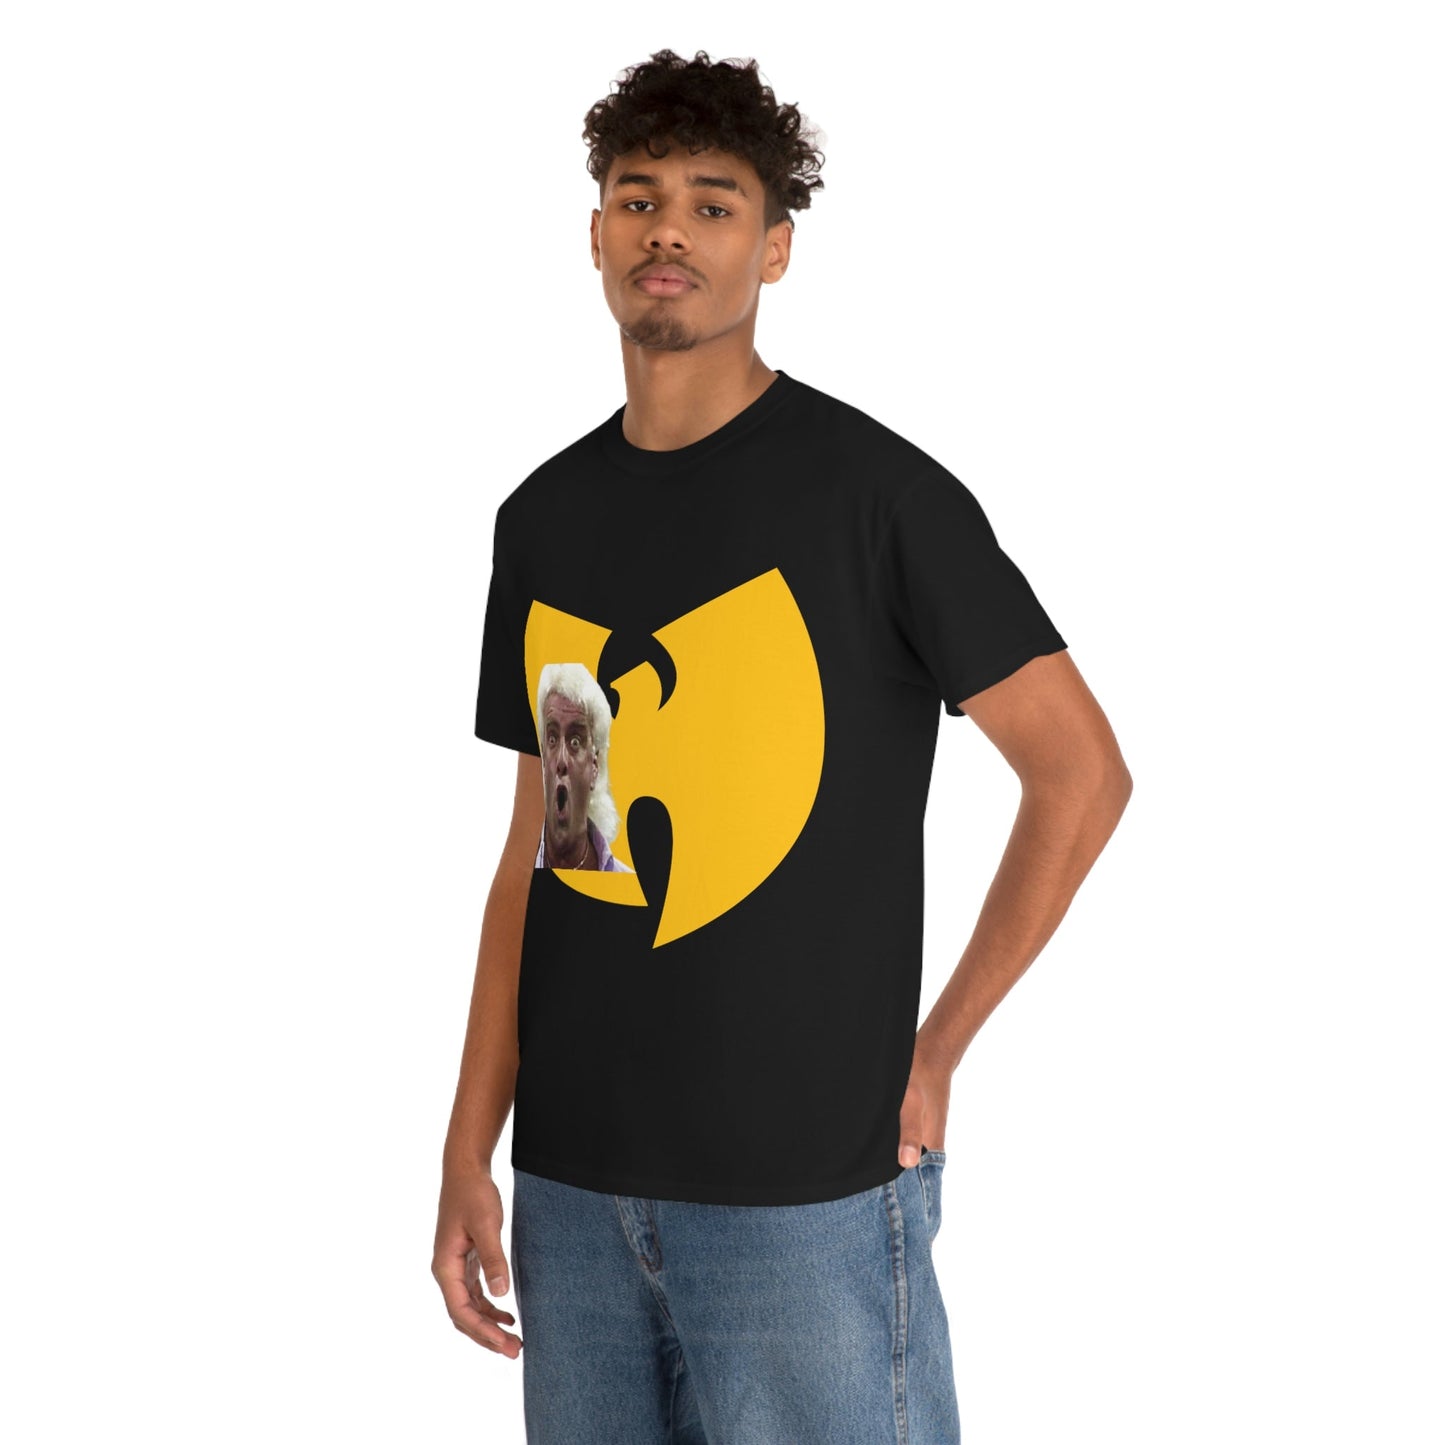 Woo Tang Ric Flair T-Shirt - Perfect for Hip Hop and Wrestling Fans - RetroTeeShop